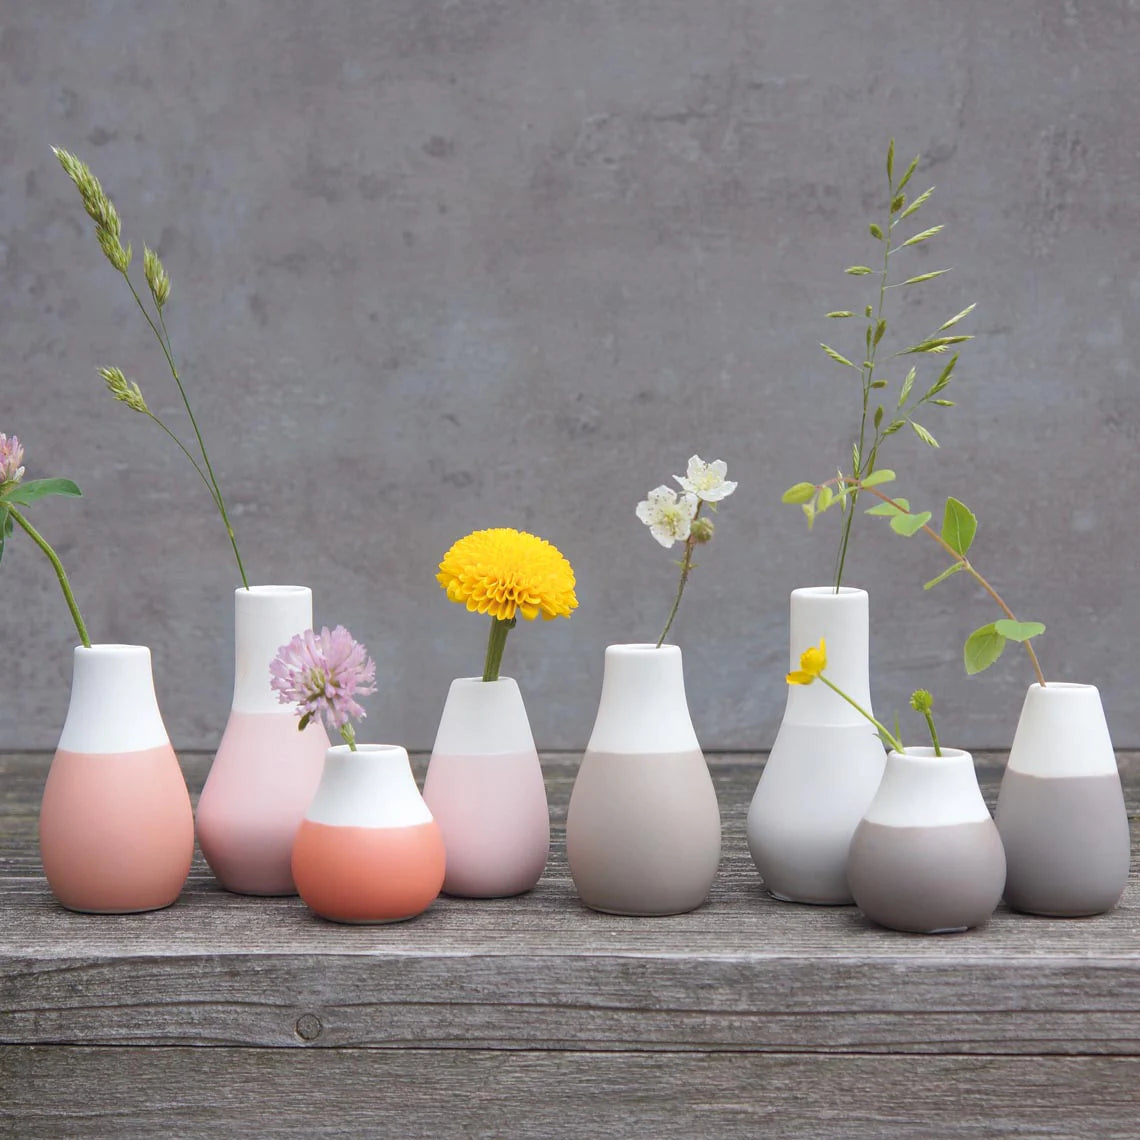 Pastel Two-Tone Mini Vases -  Shades Of Red Vases